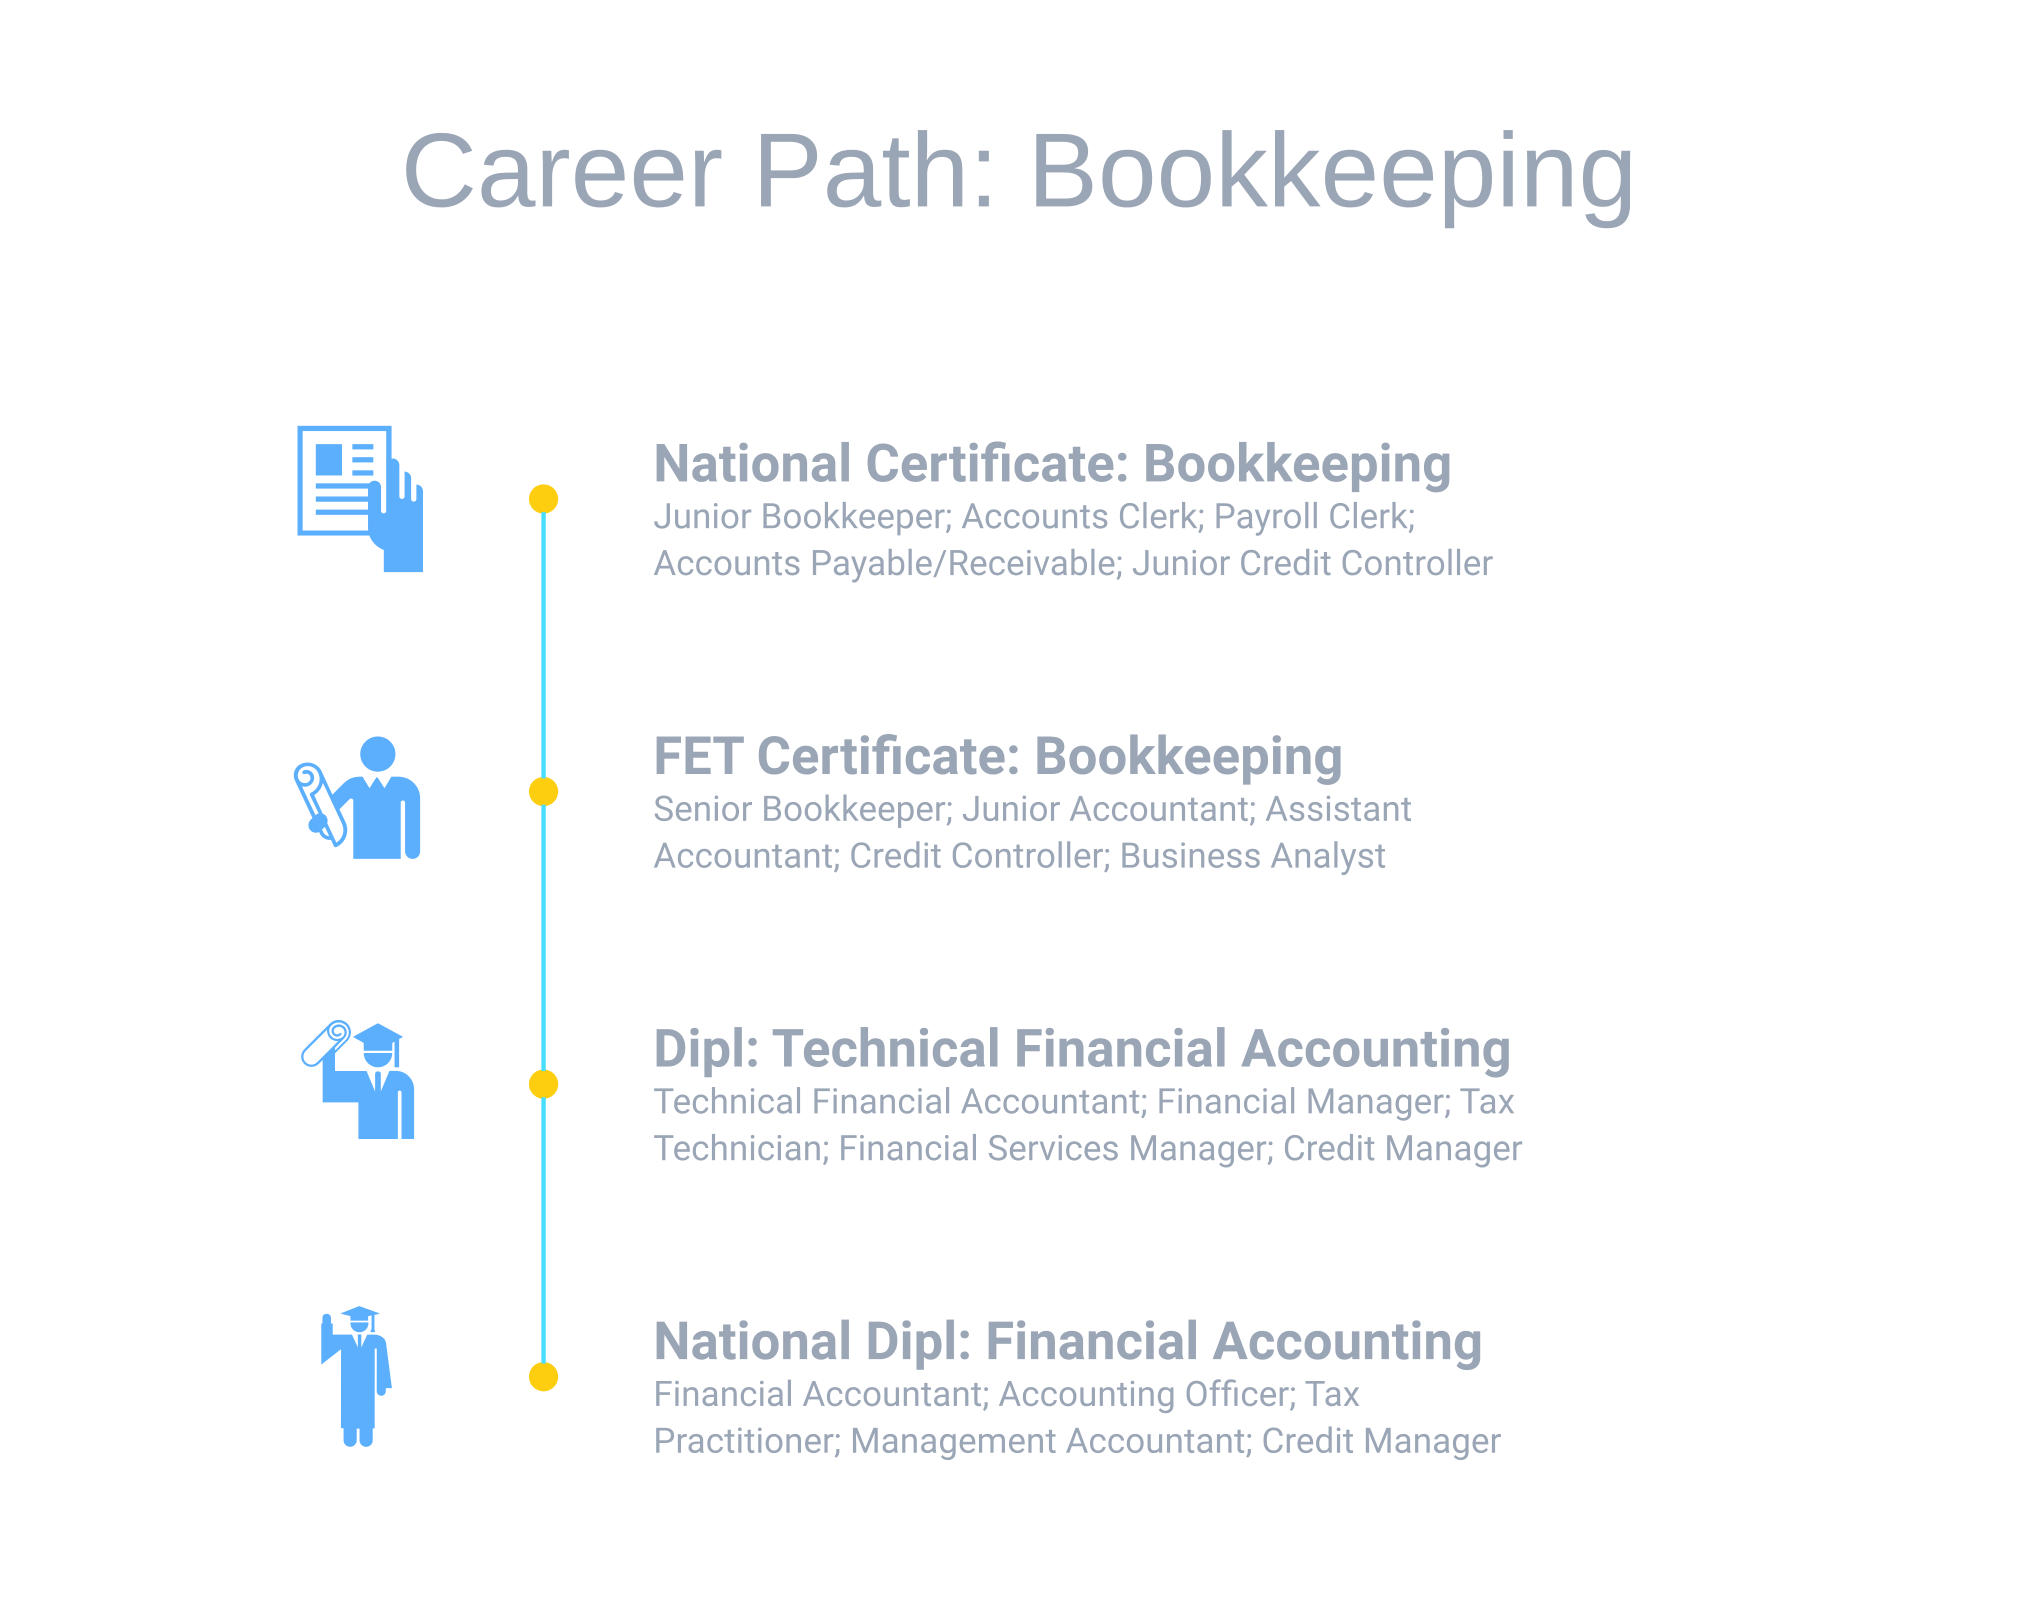 Bookkeeping in South Africa via Distance Learning